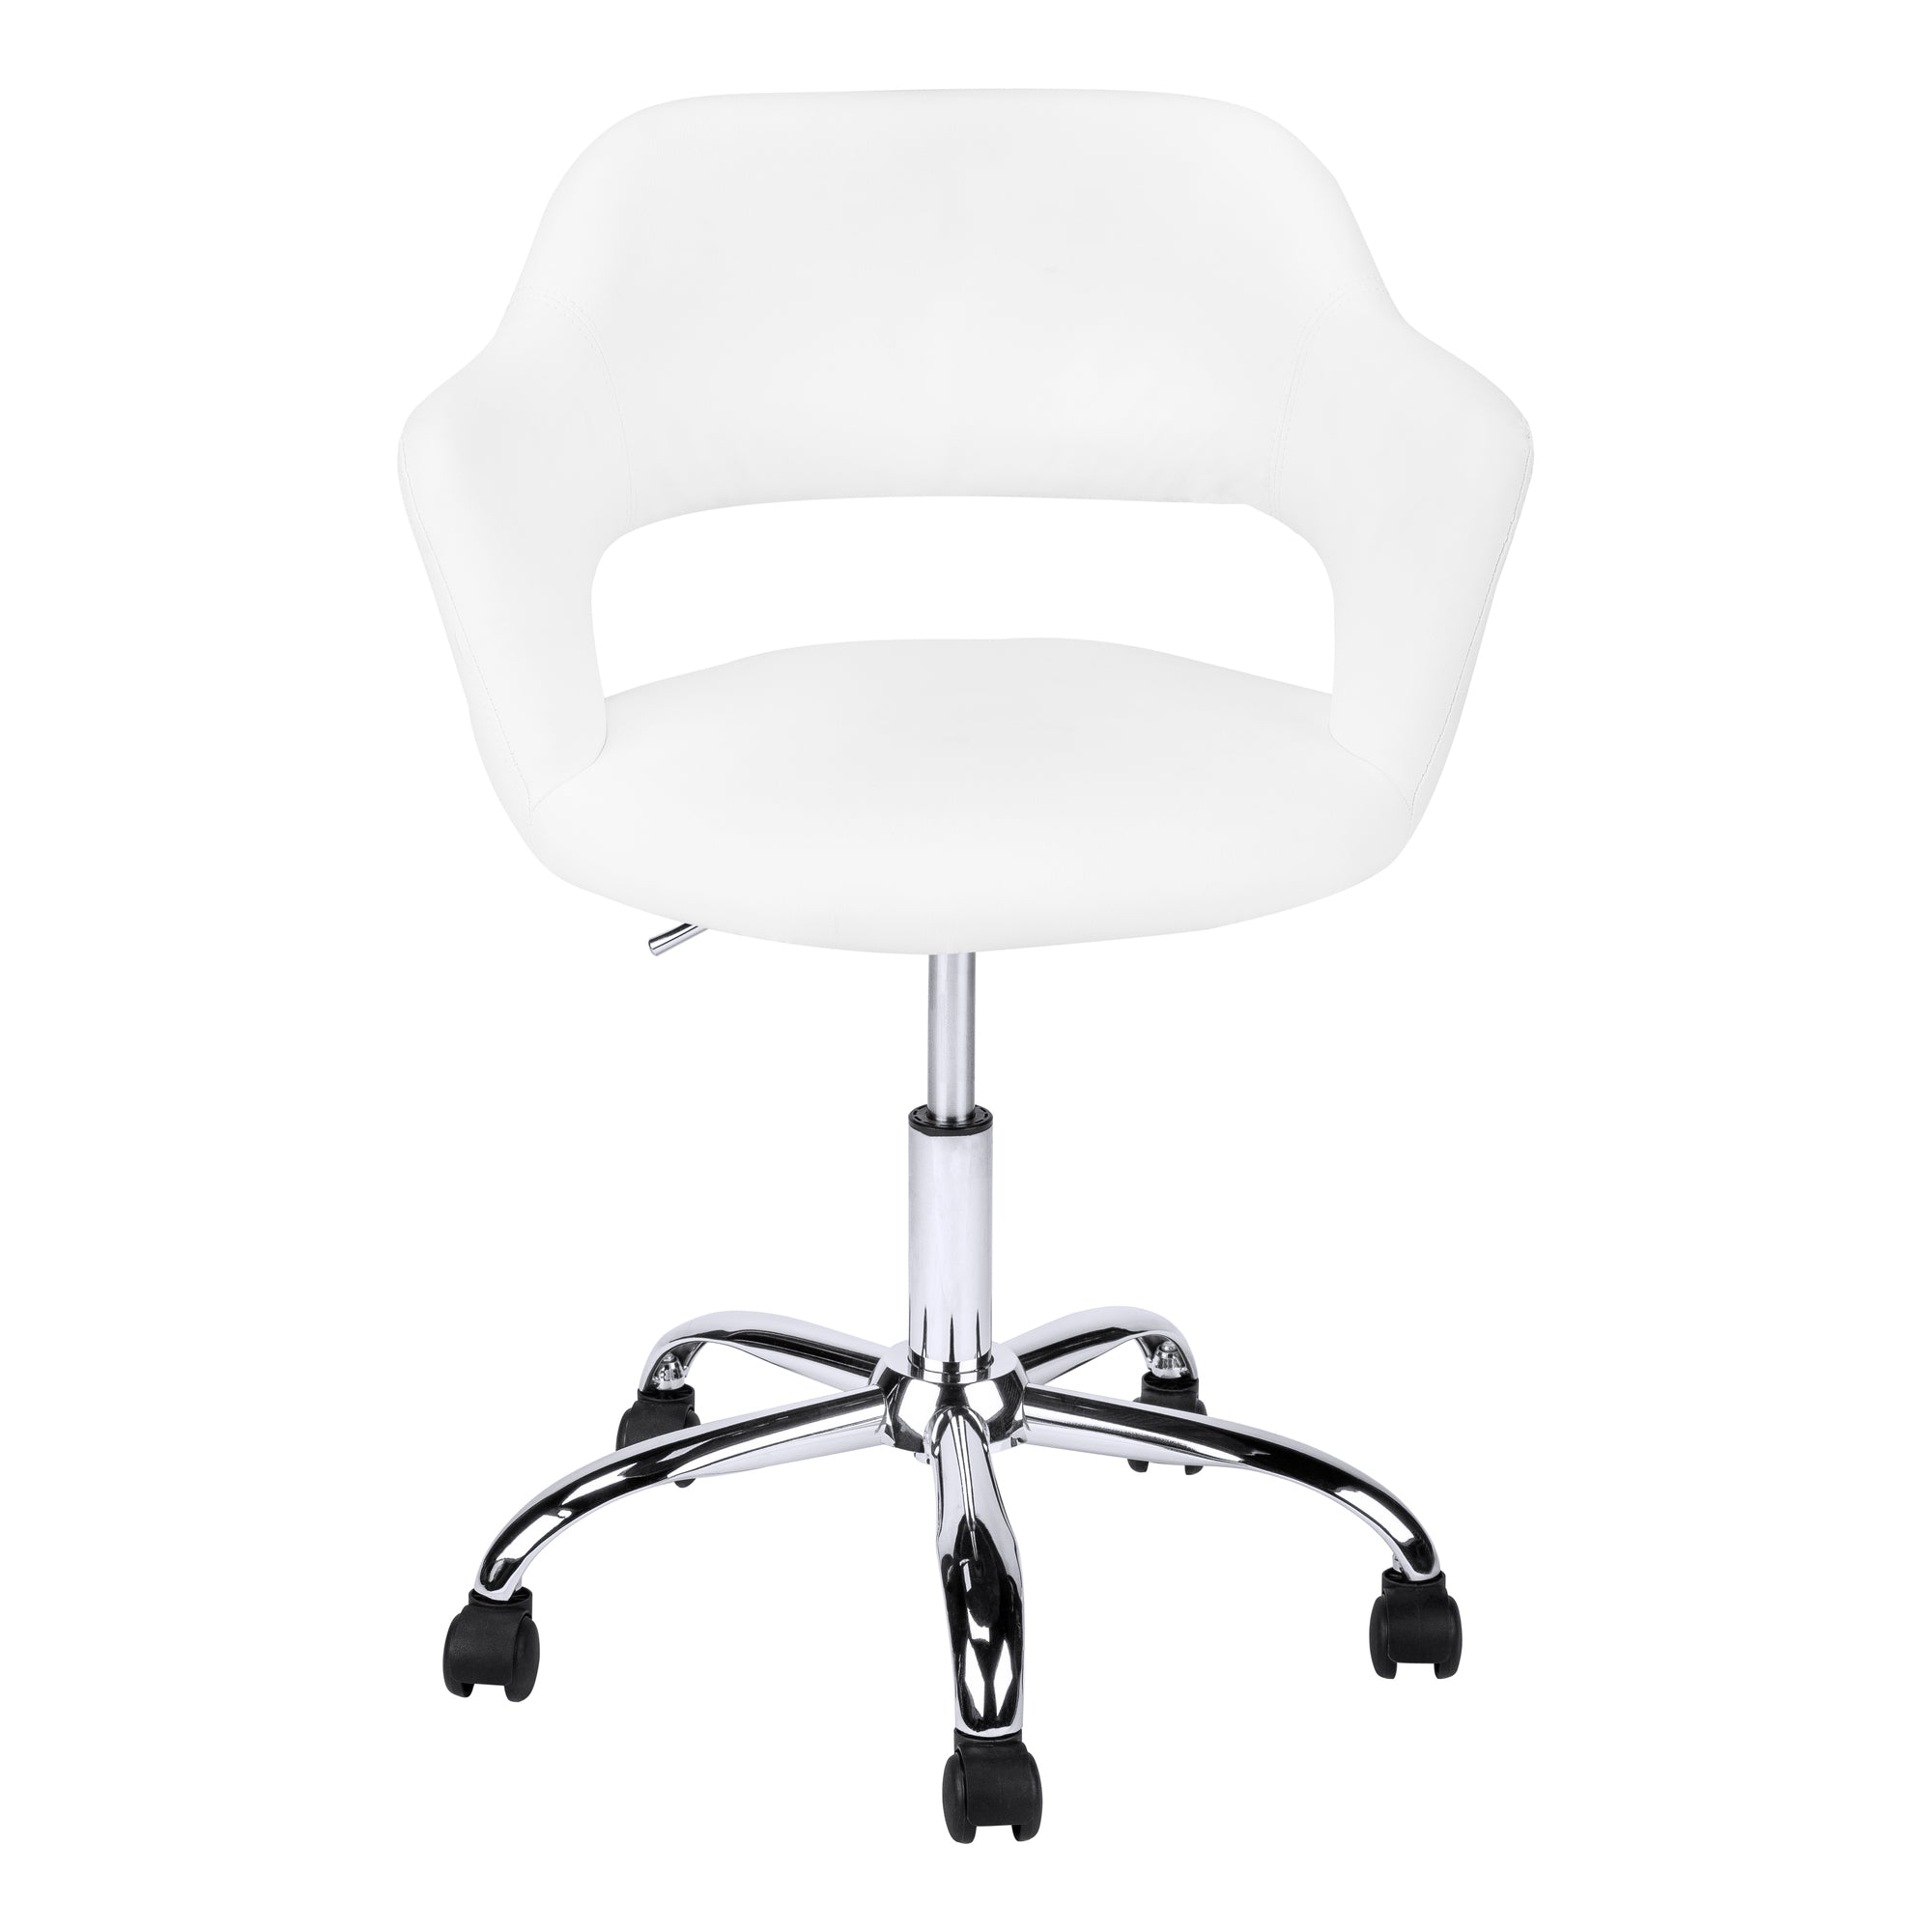 MN-957299    Office Chair, Adjustable Height, Swivel, Ergonomic, Armrests, Computer Desk, Office, Metal Base, Leather Look, White, Chrome, Contemporary, Modern